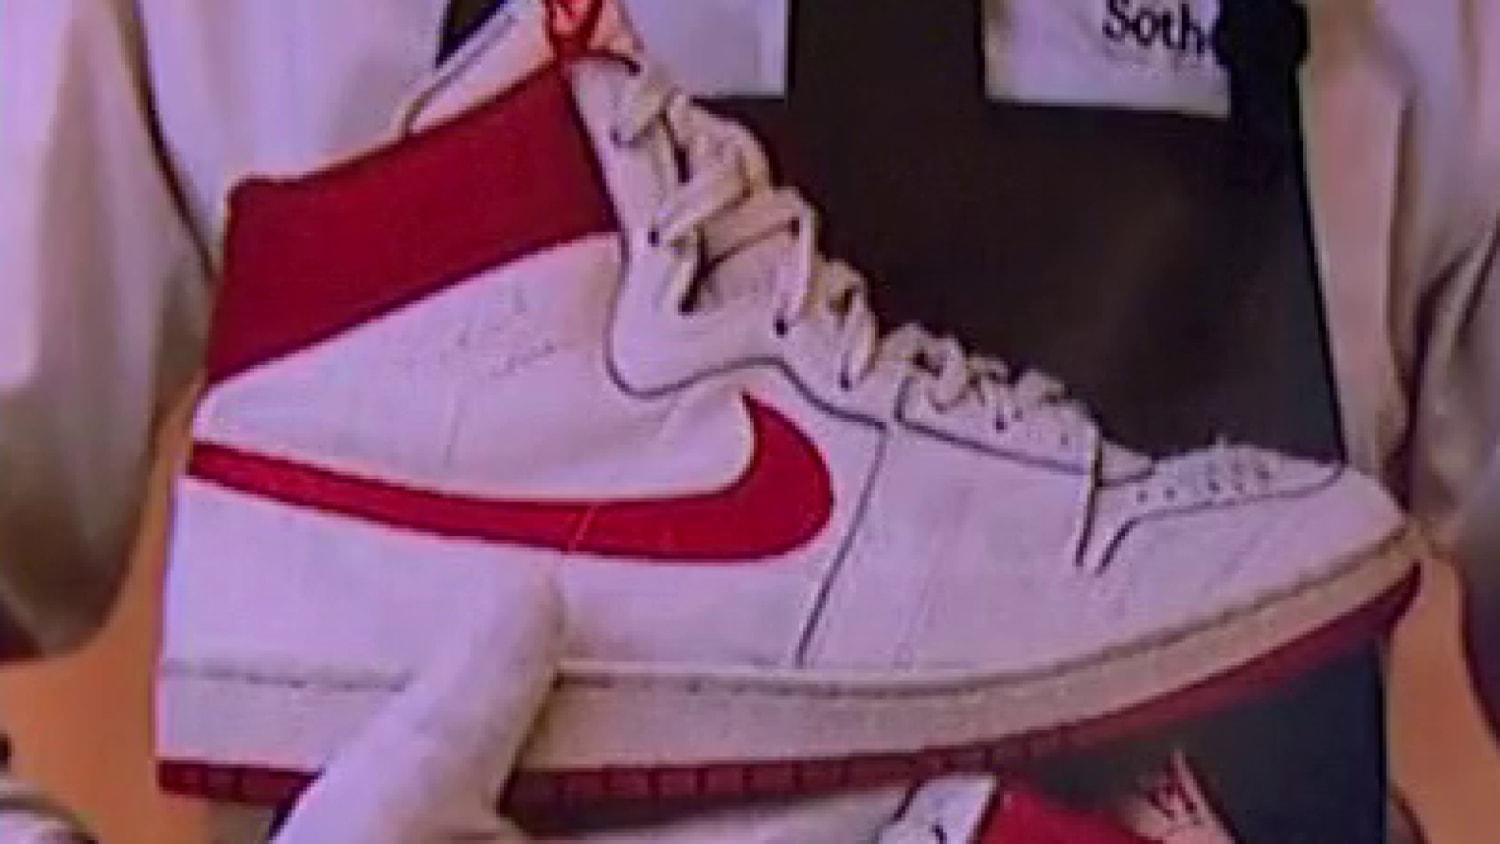 Michael Jordan sneakers sell for nearly $1.5 million, an auction record